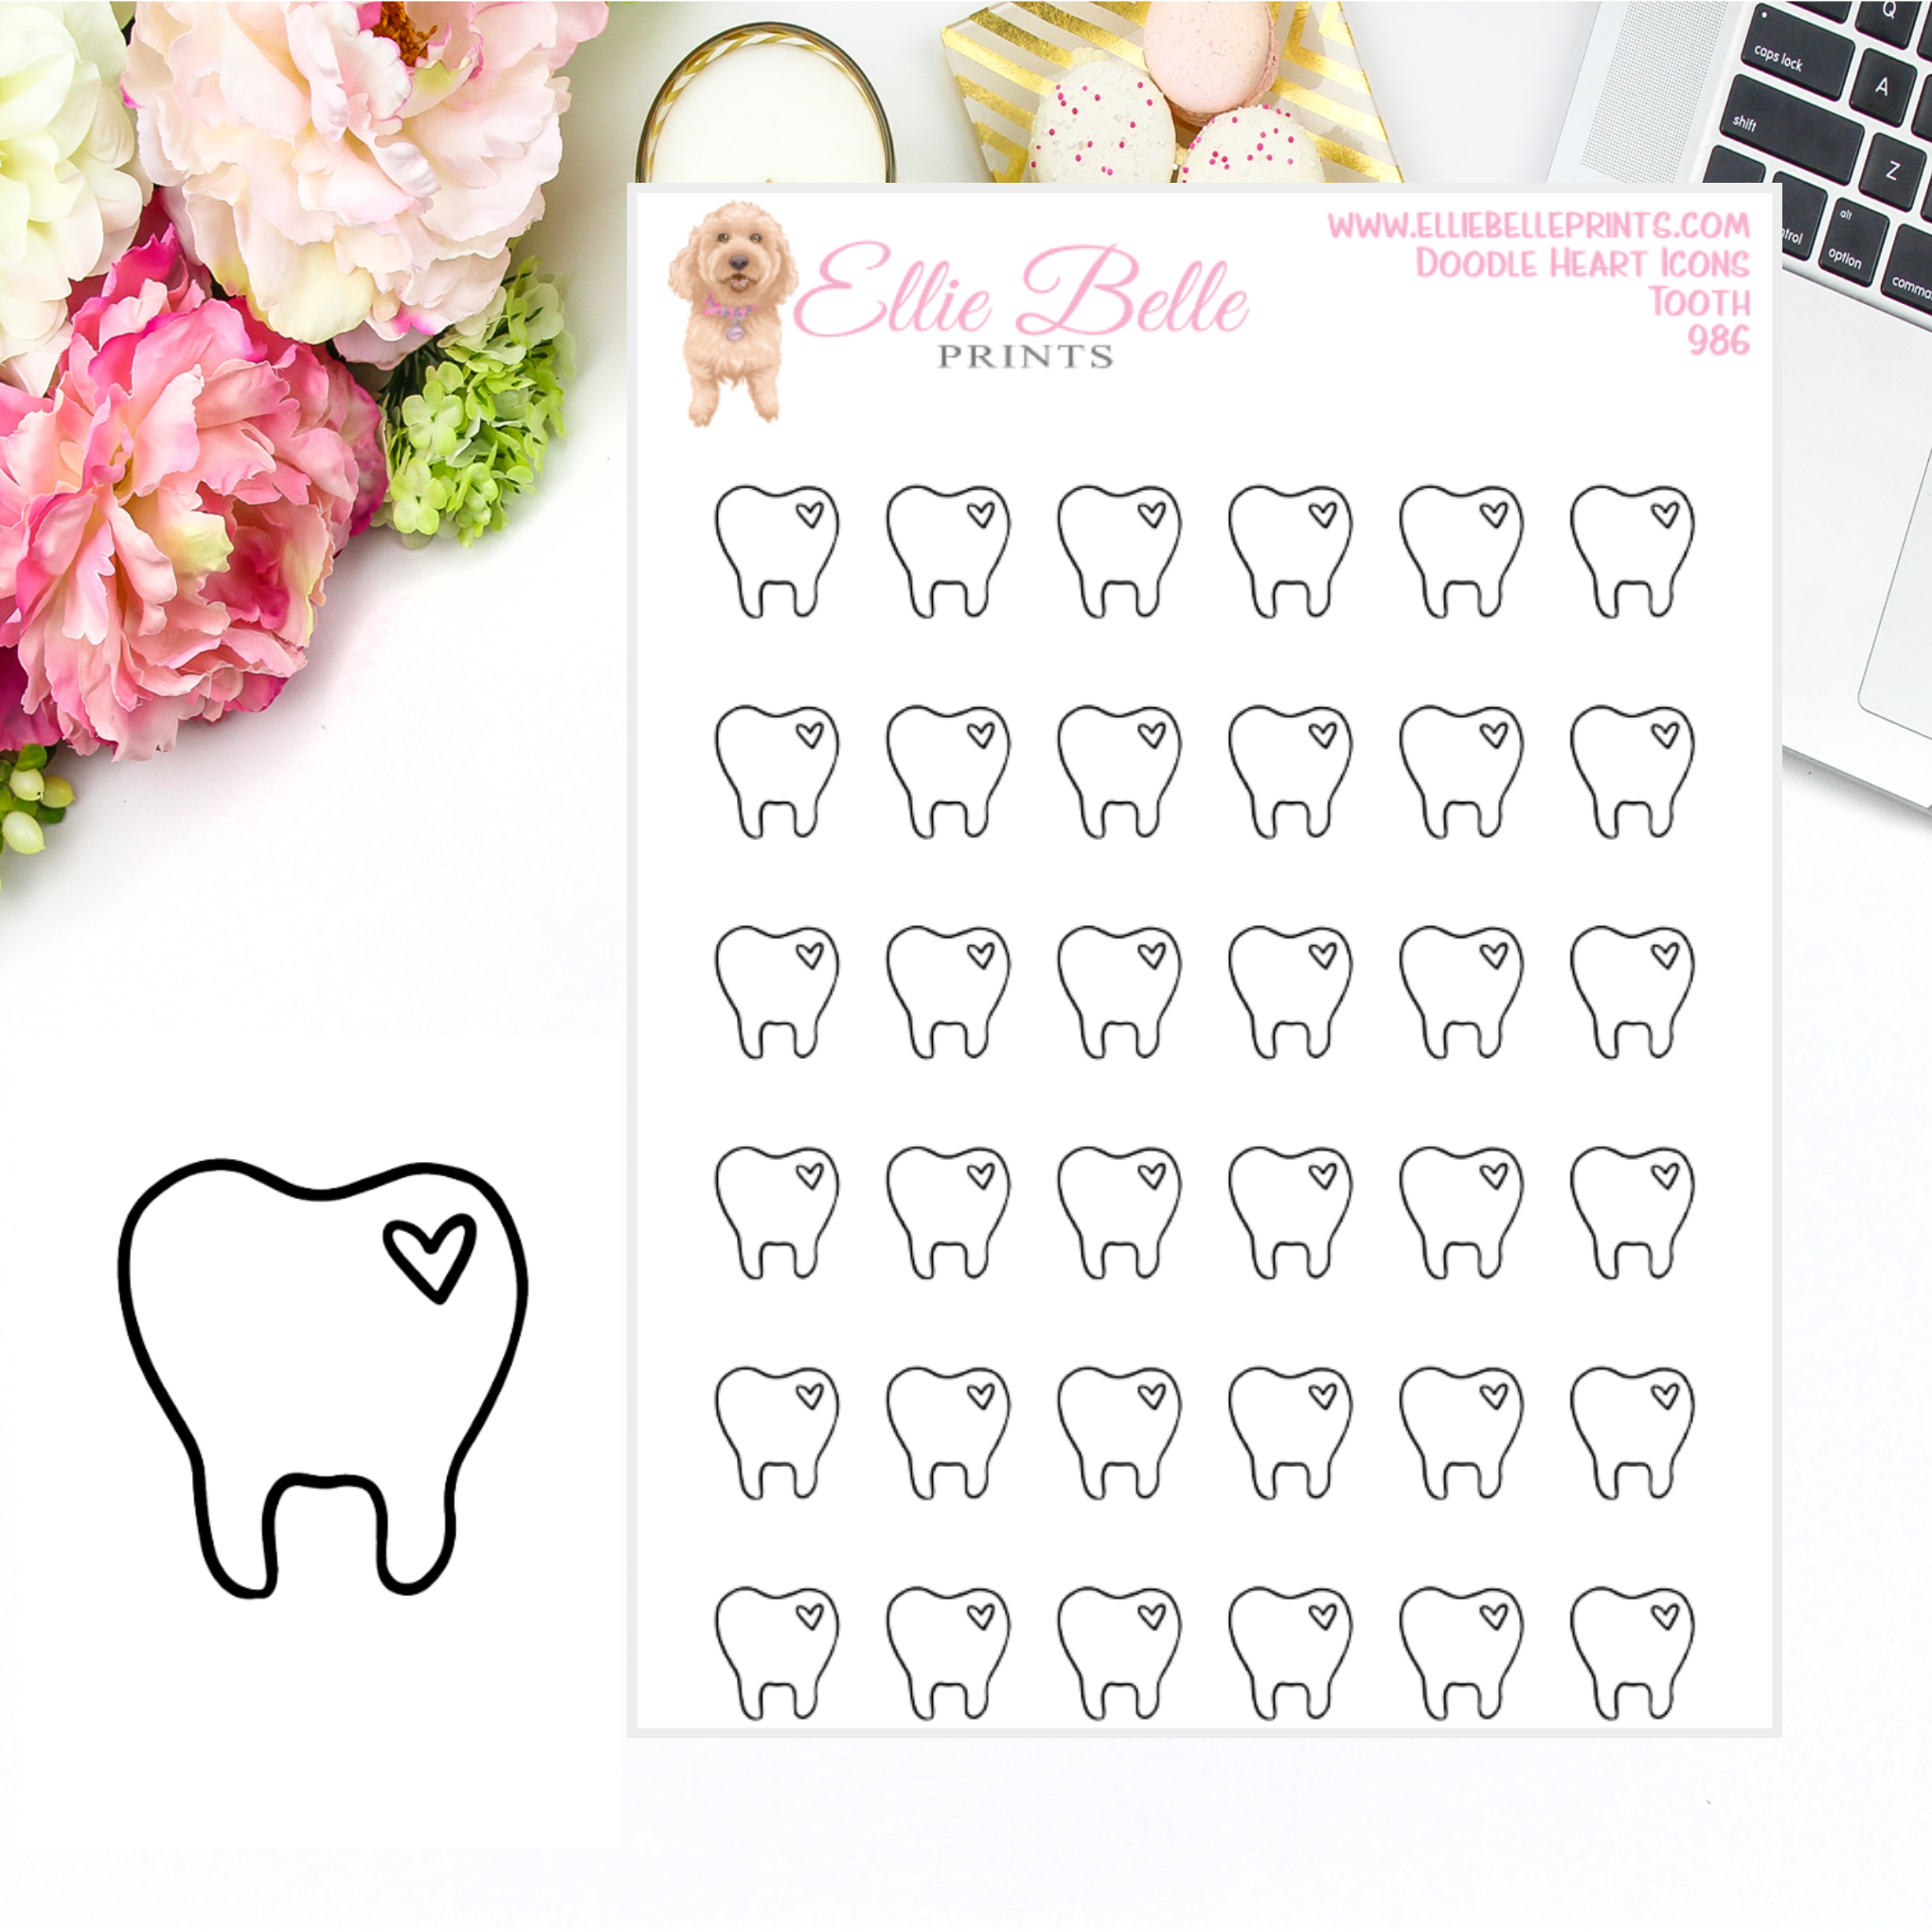 Tooth Icons - Doodle Heart Icons